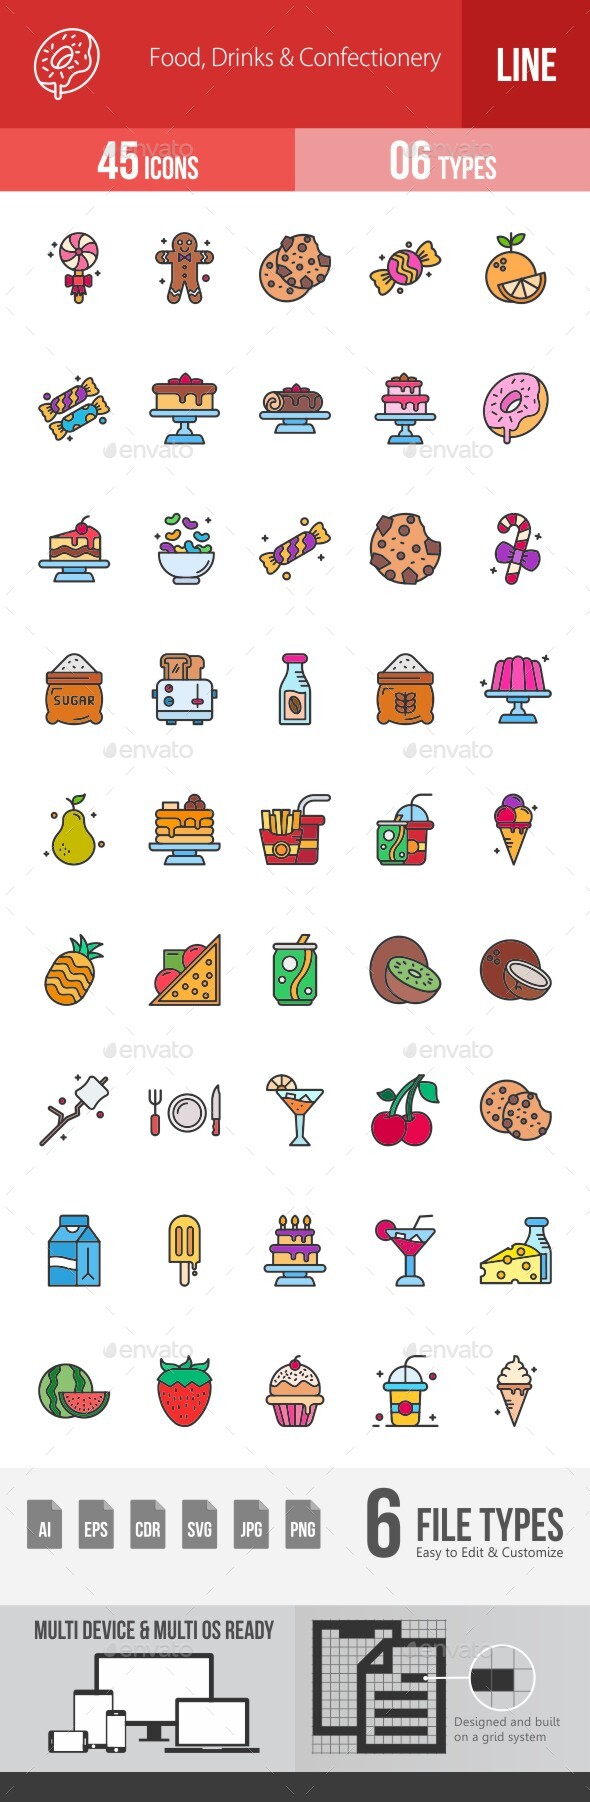 [DOWNLOAD]Food, Drinks & Confectionery Filled Line Icons